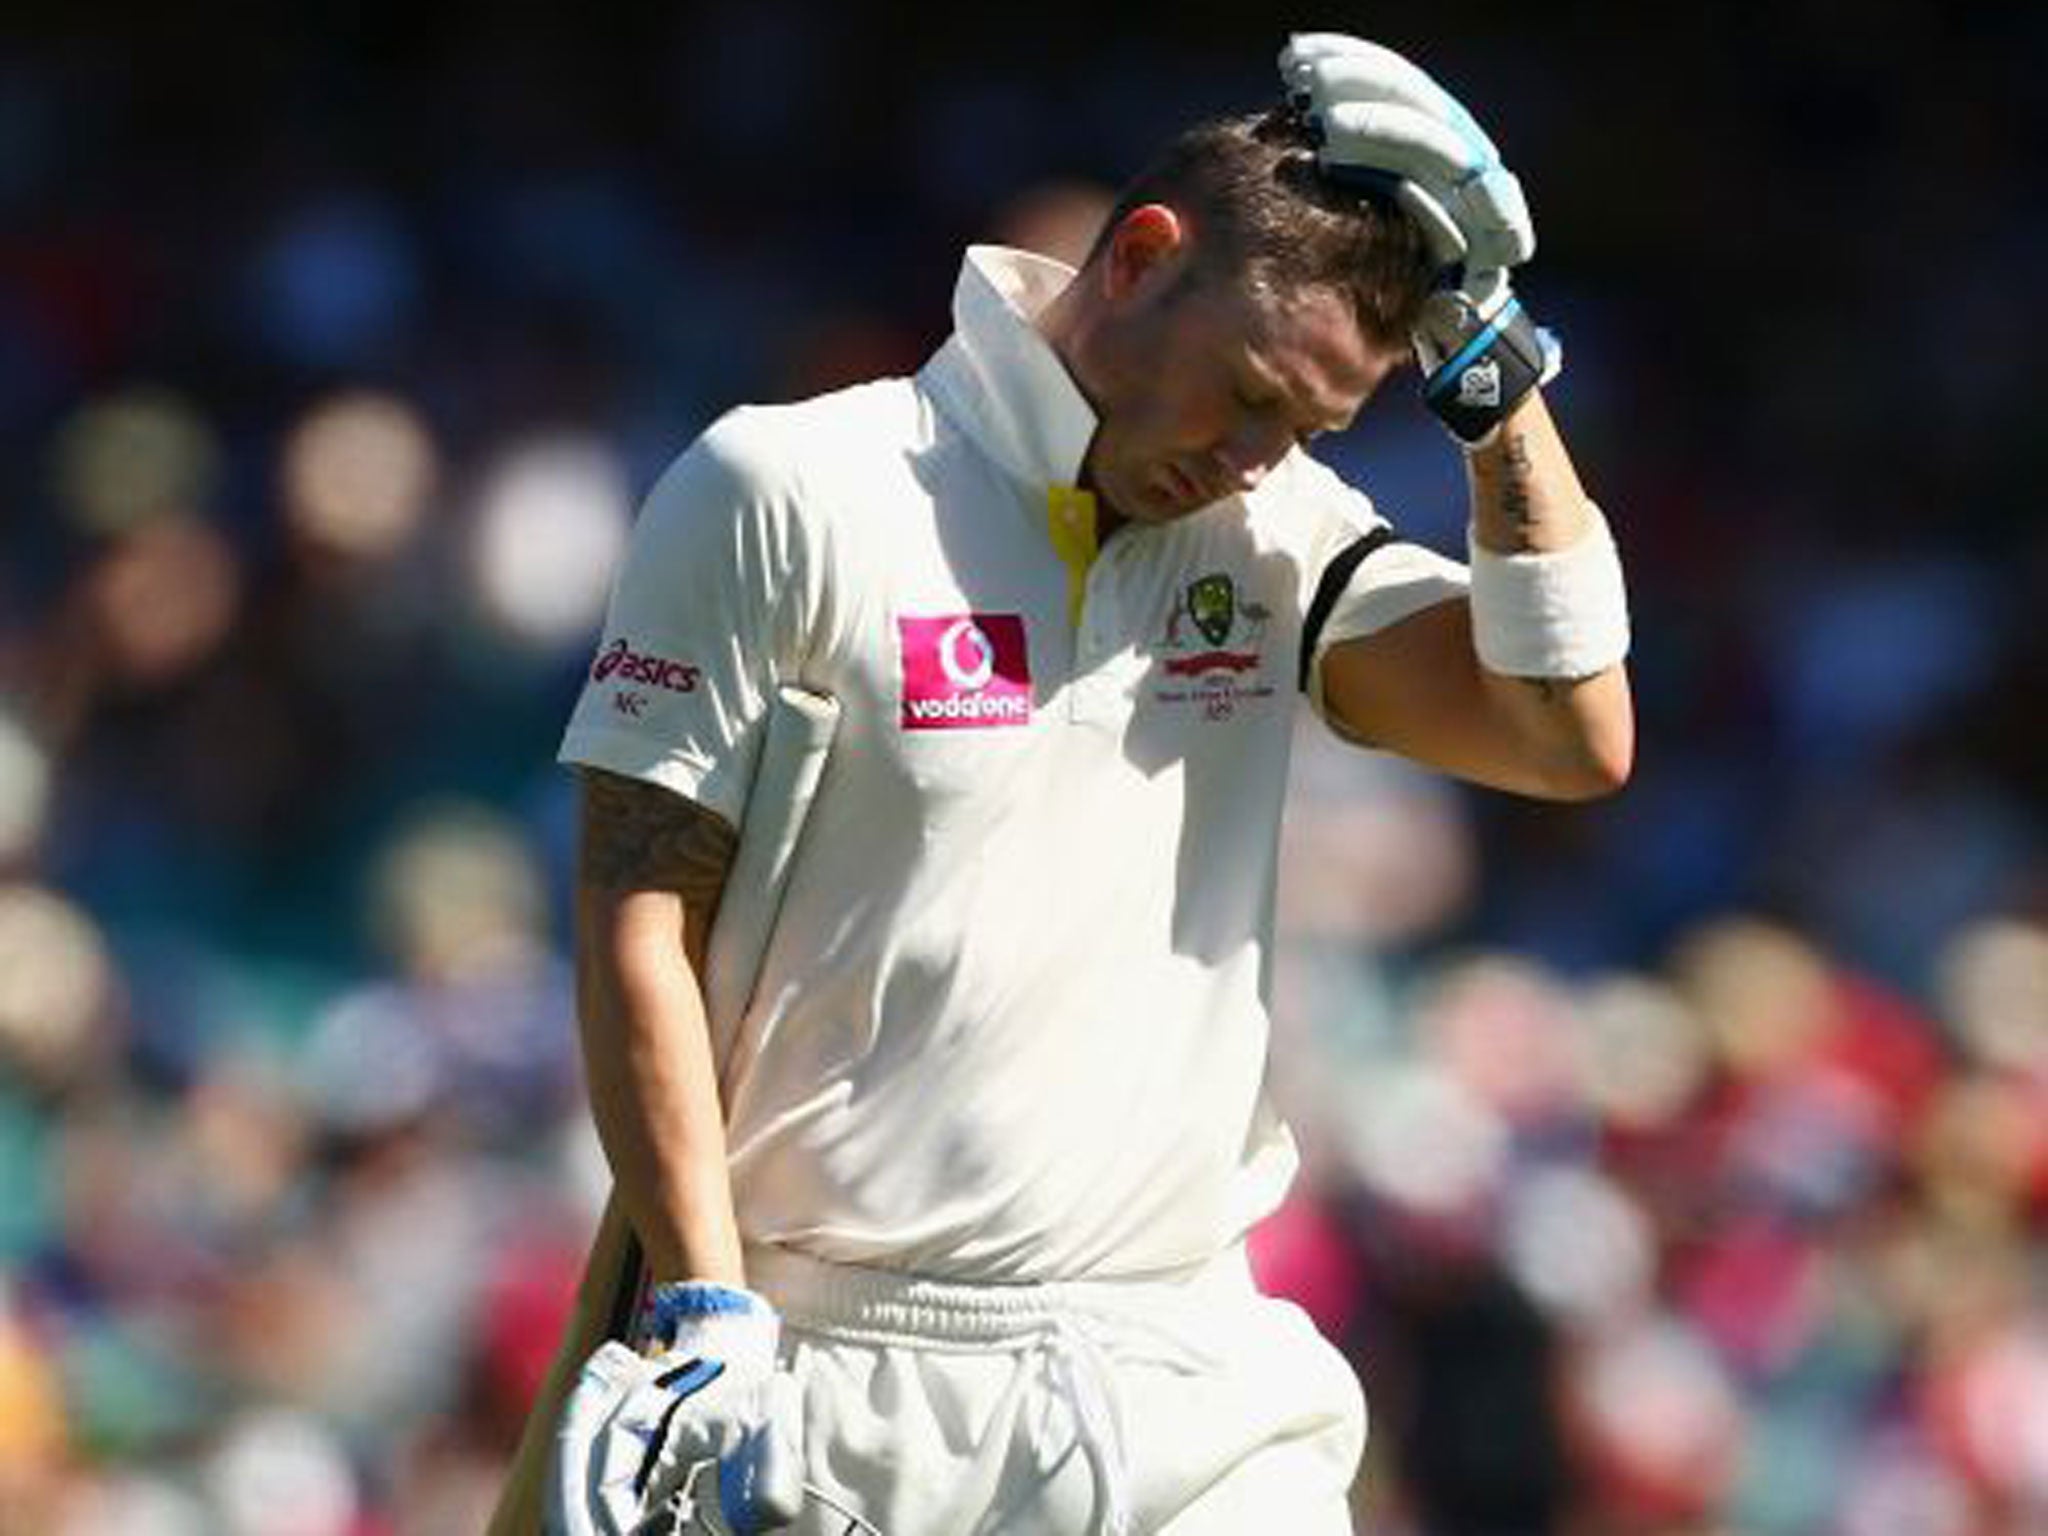 Michael Clarke must be feeling the strain after a difficult week